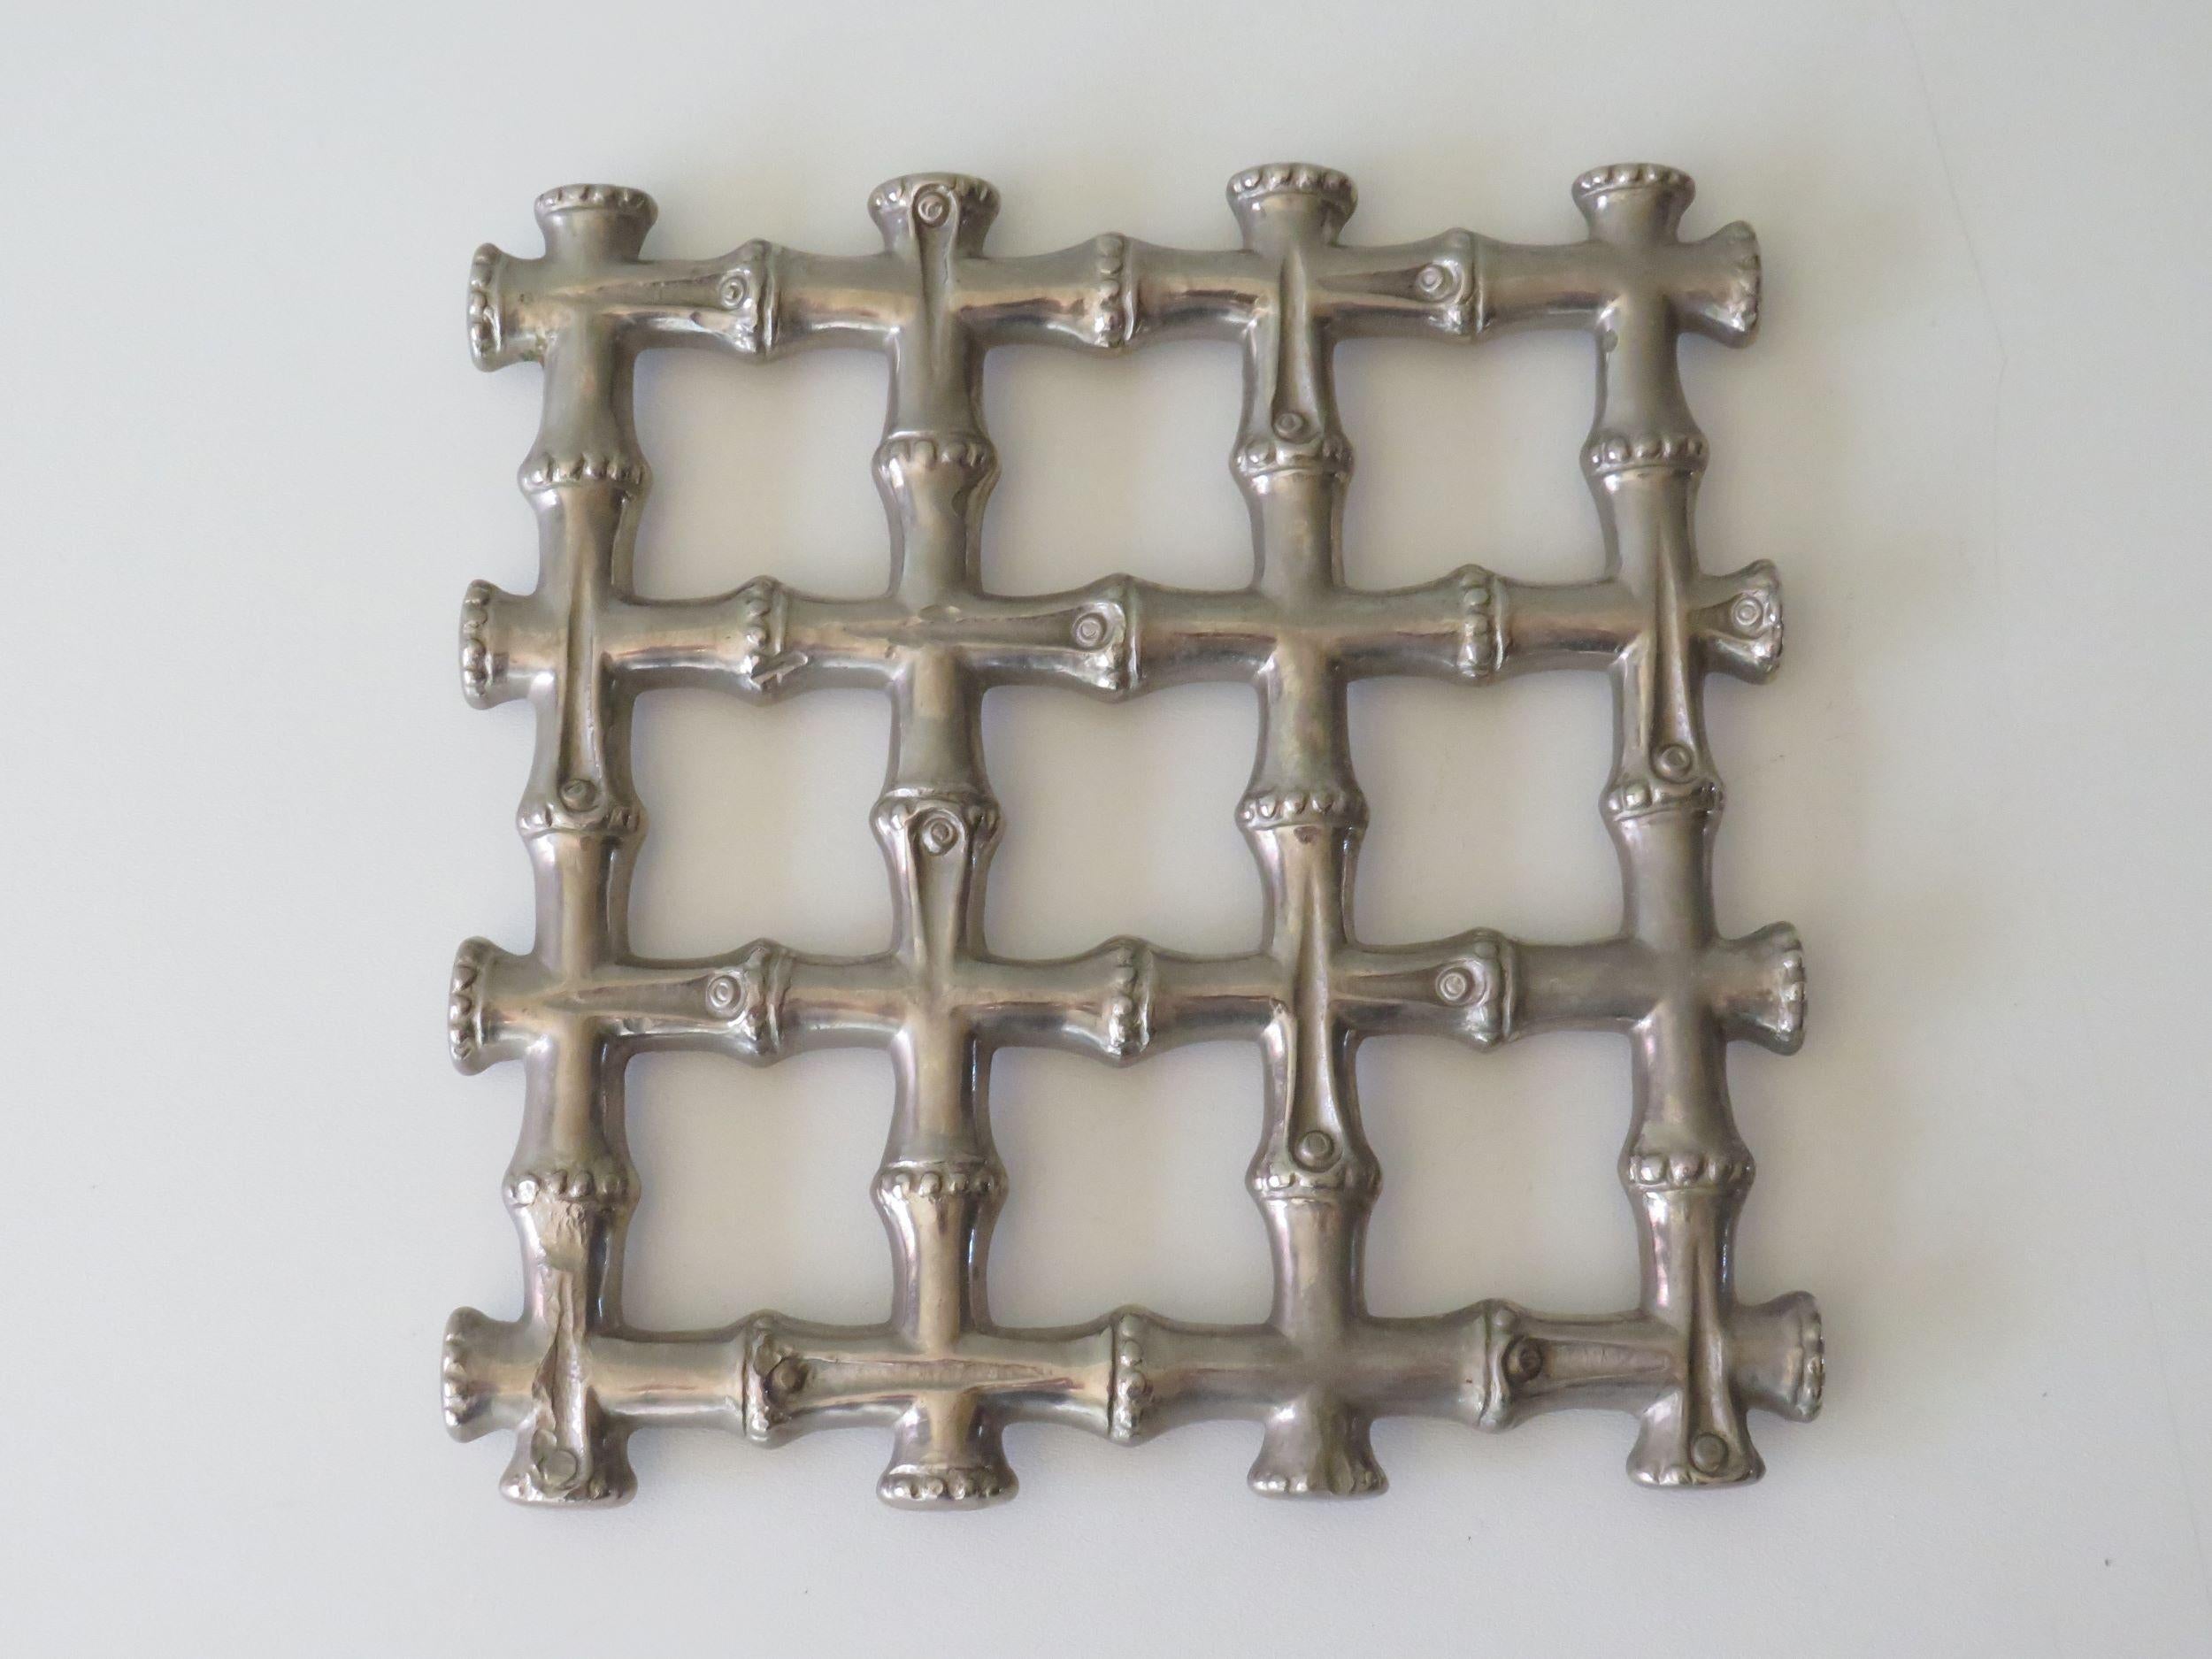 Square trivet, coaster in heavy metal, silver colored in Hollywood Regency style.